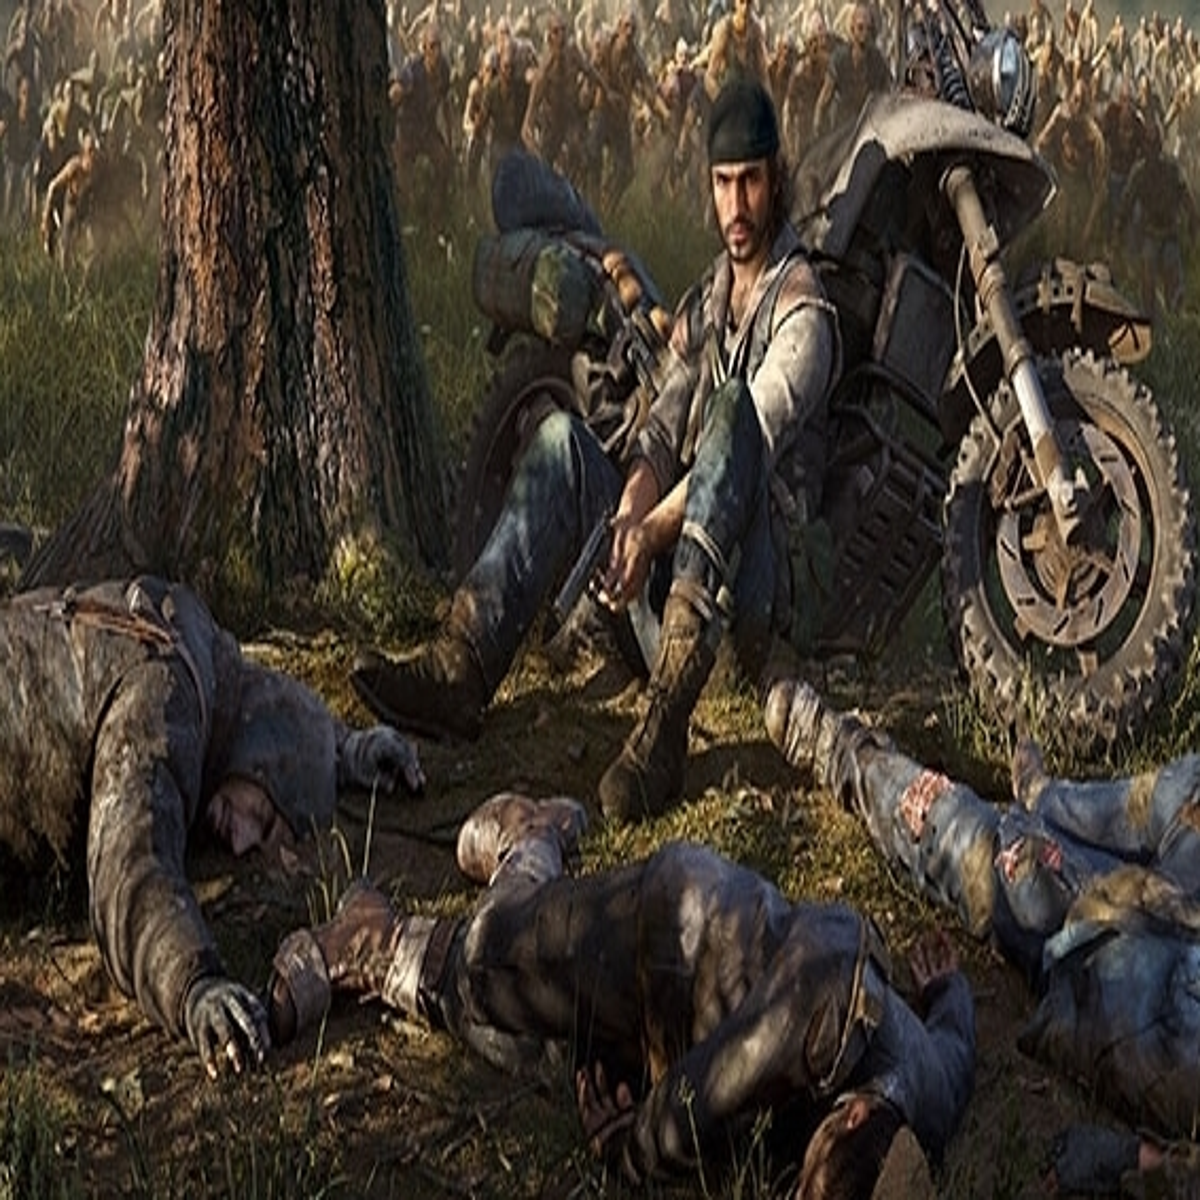 Review: 'Days Gone' brings survival-horror to the open world